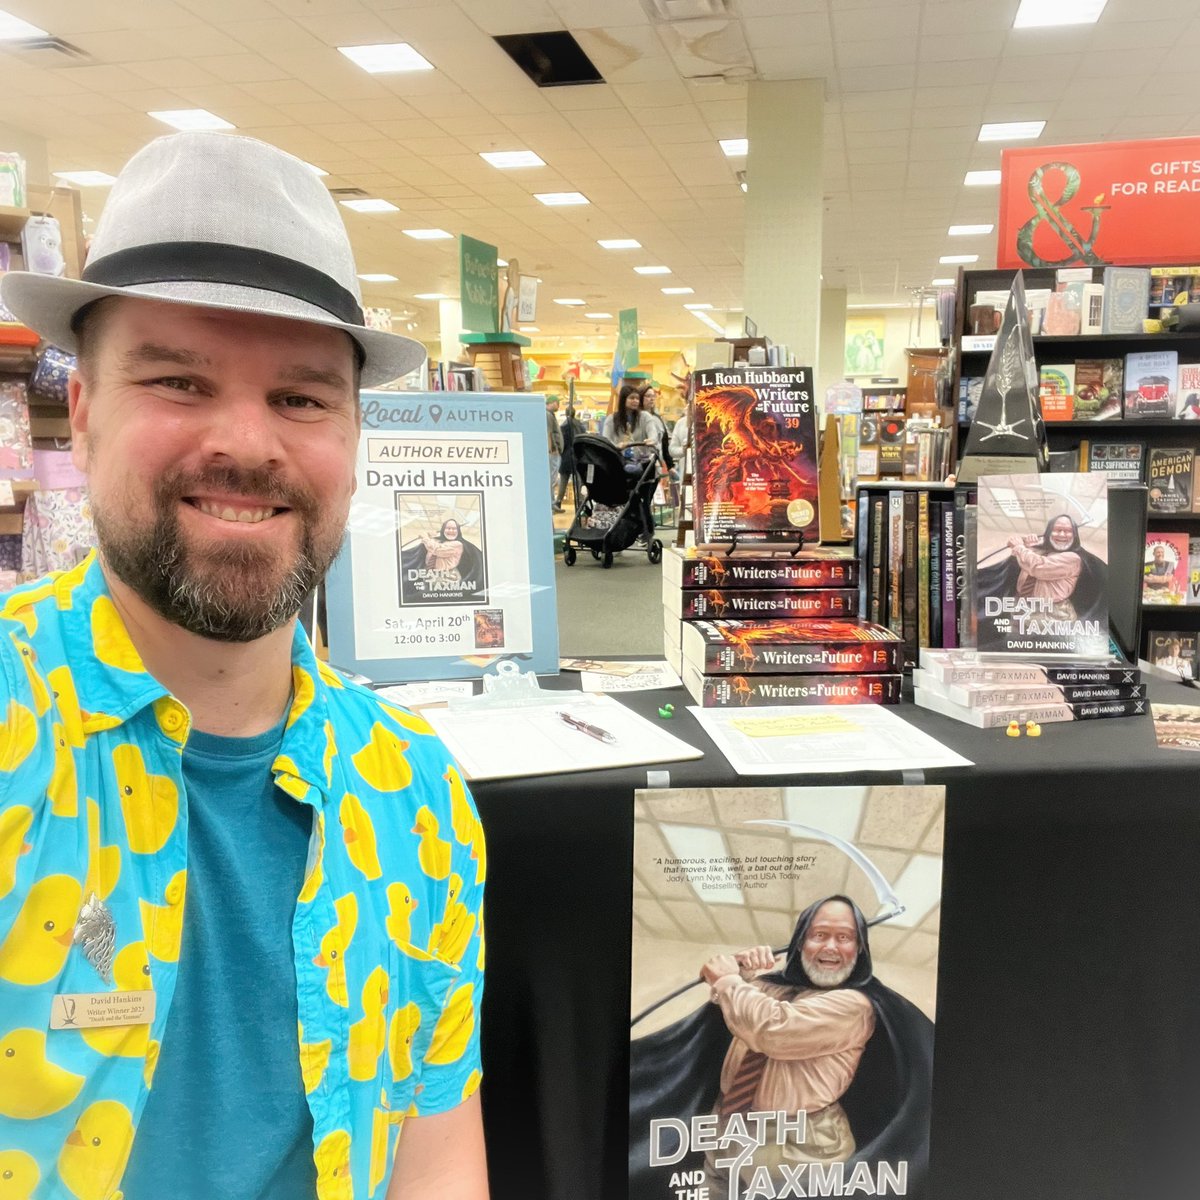 SOLD OUT! Thank you Barnes & Noble for an outstanding local book launch for Death and the Taxman.

Get your copy here:

books2read.com/deathandthetax…

#deathandthetaxman #newreleases #newbookalert #newbookrelease #humor #readingcommunity #readingtime #readinglist